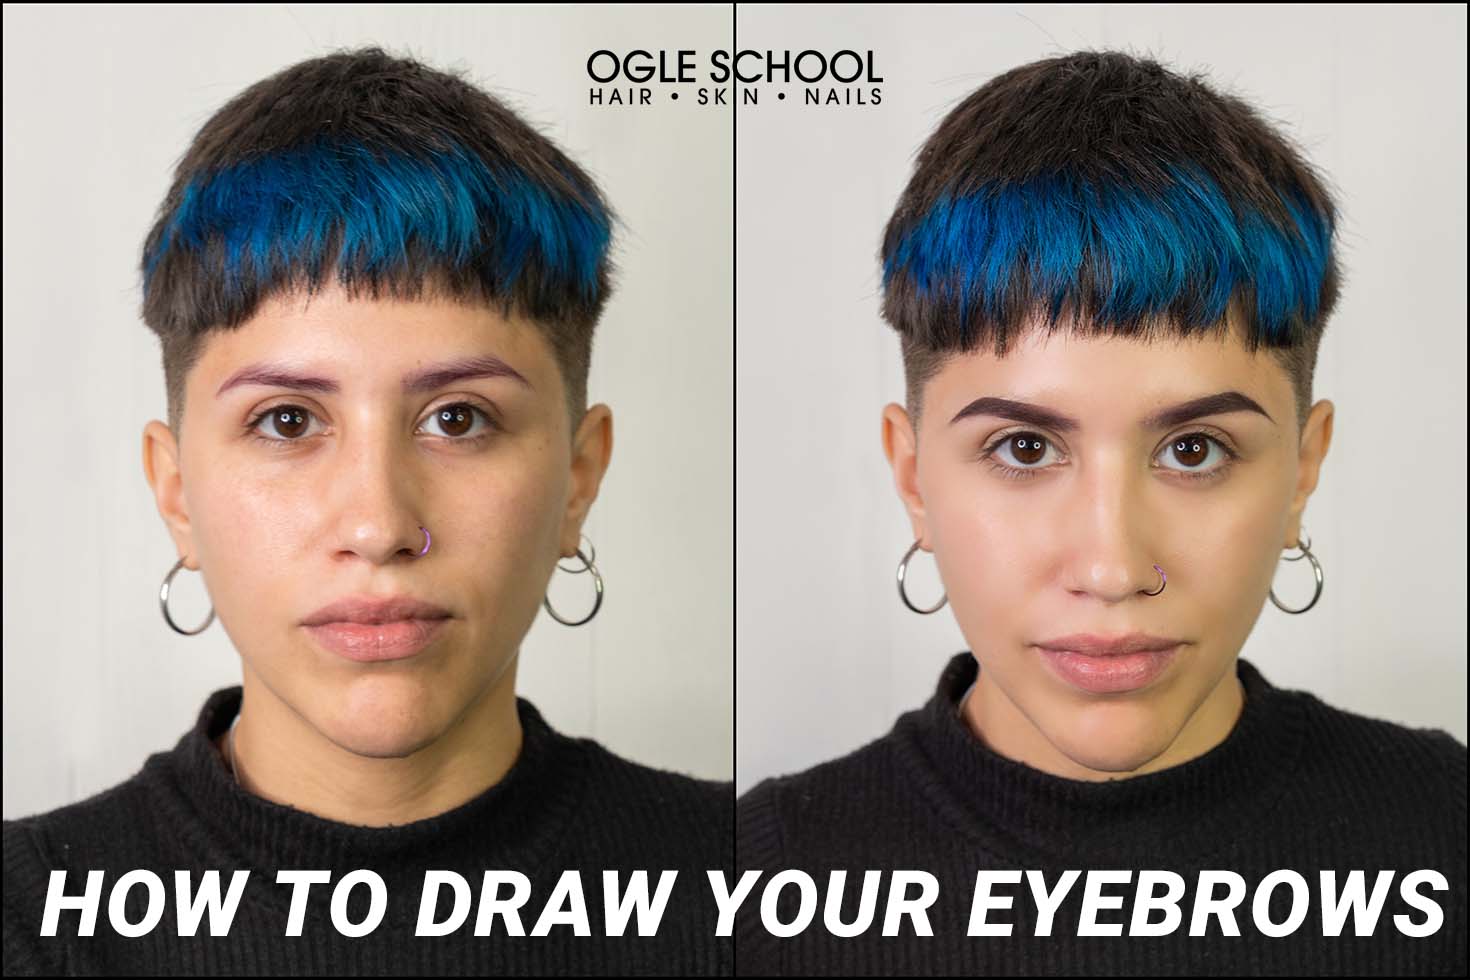 Tutorial: How to Draw in Your Eyebrows